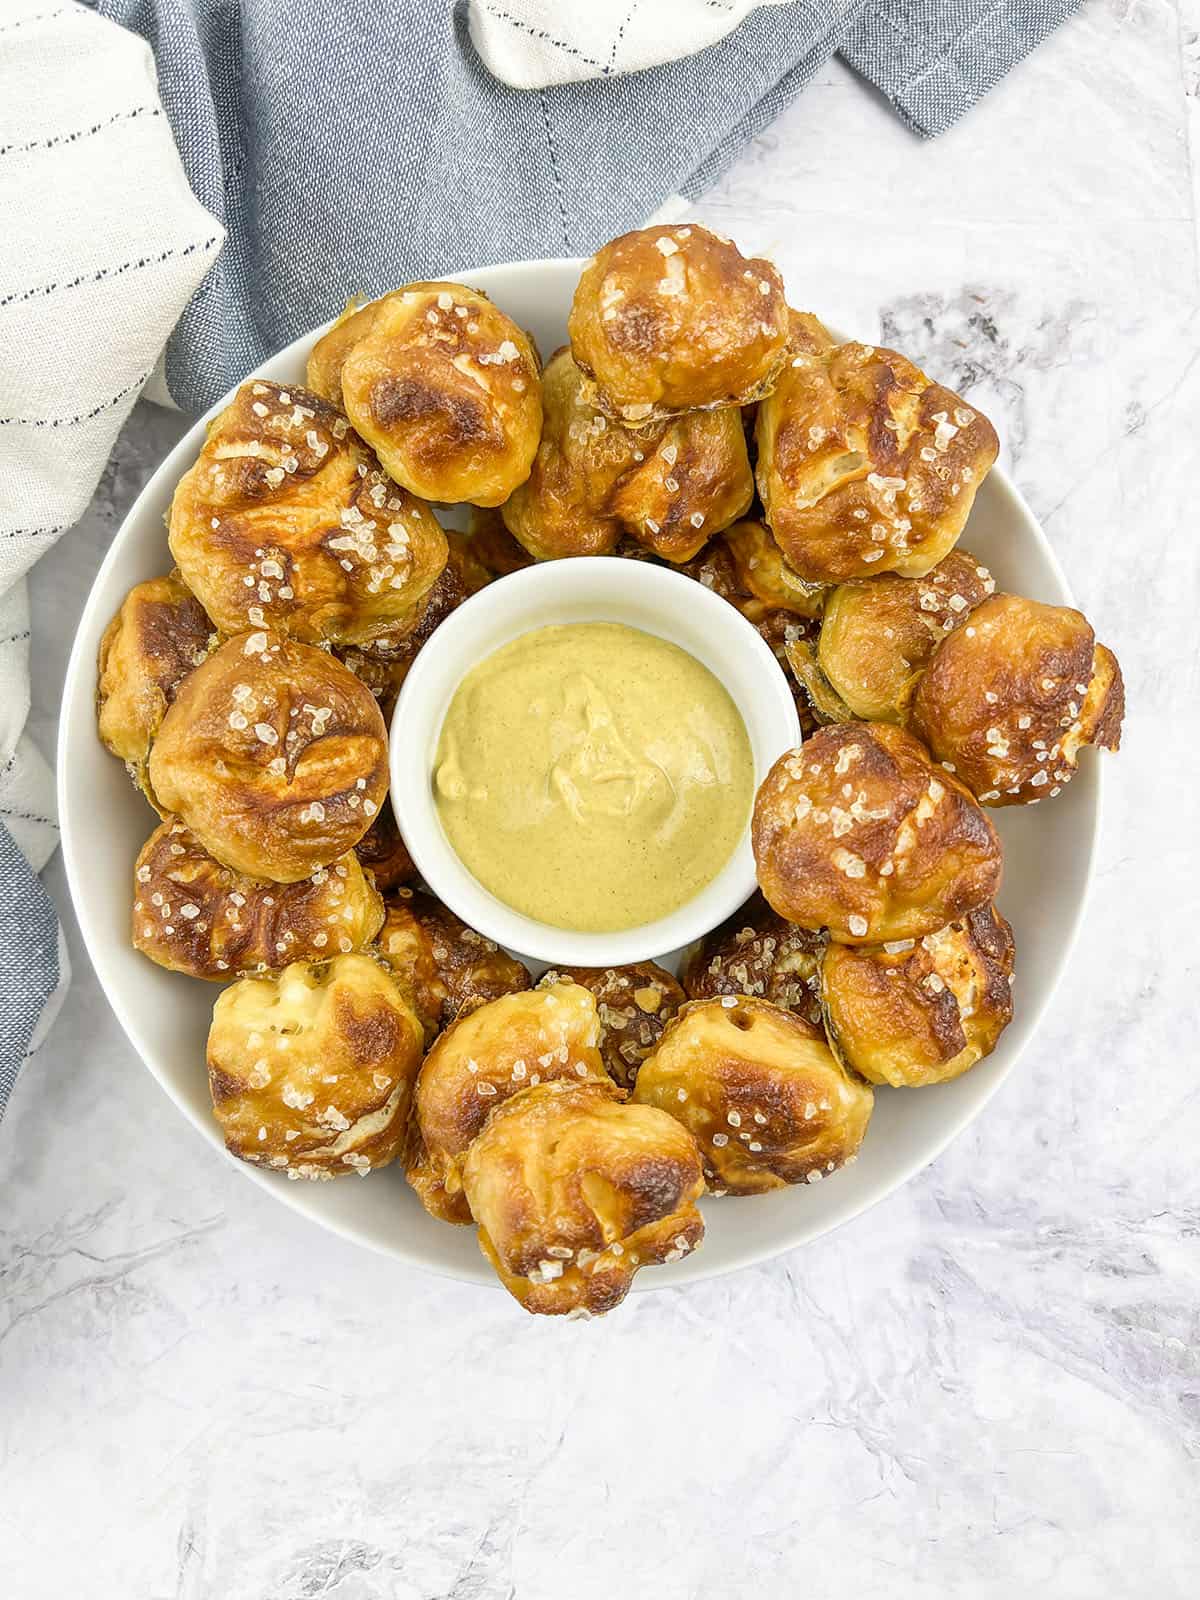 A bowl of pretzel knots with cheese dip in the center.